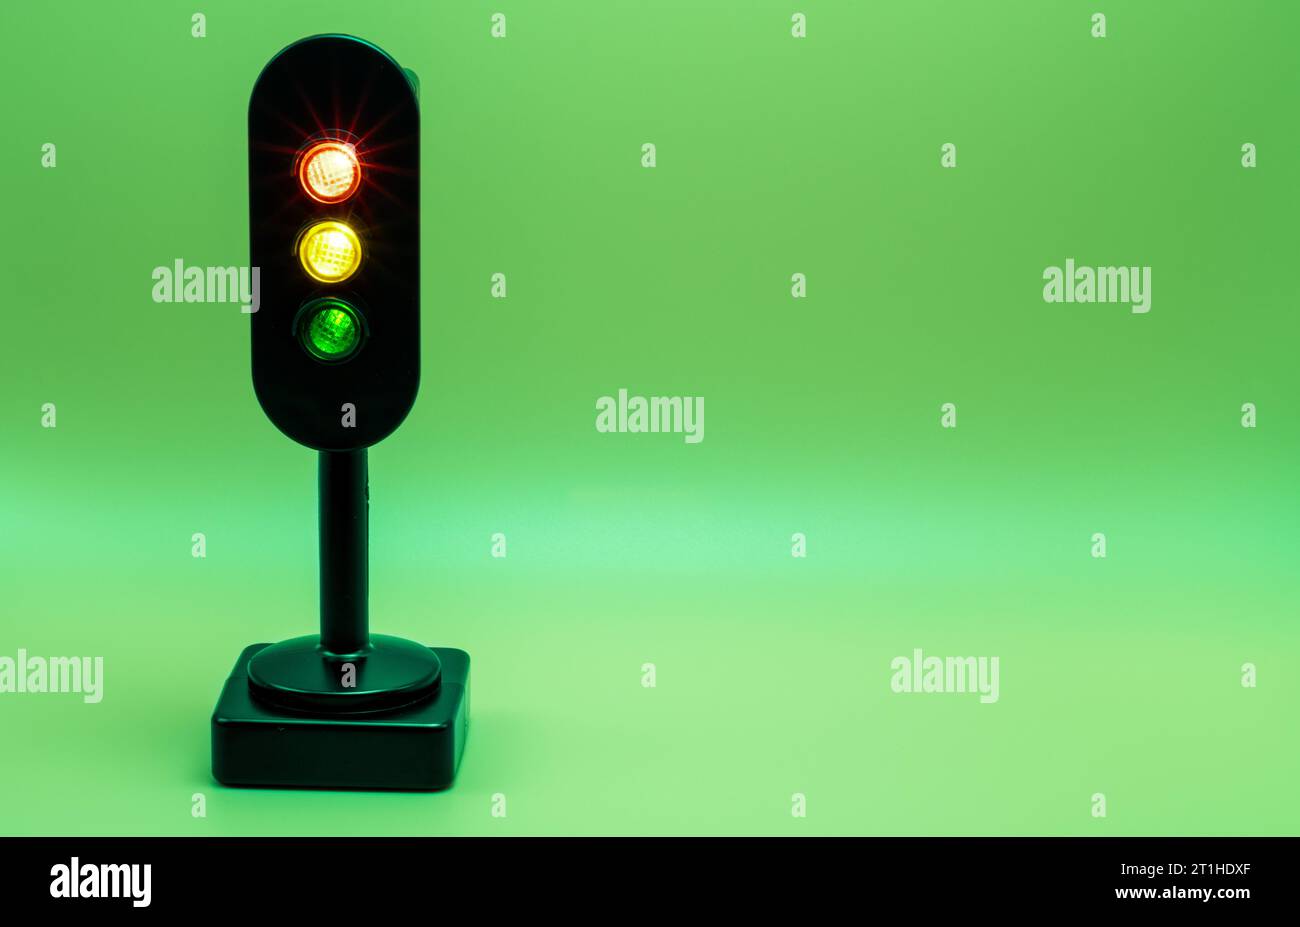 Miniature traffic light with red, orange and green light on. Studio shot. Green empty background. Stock Photo